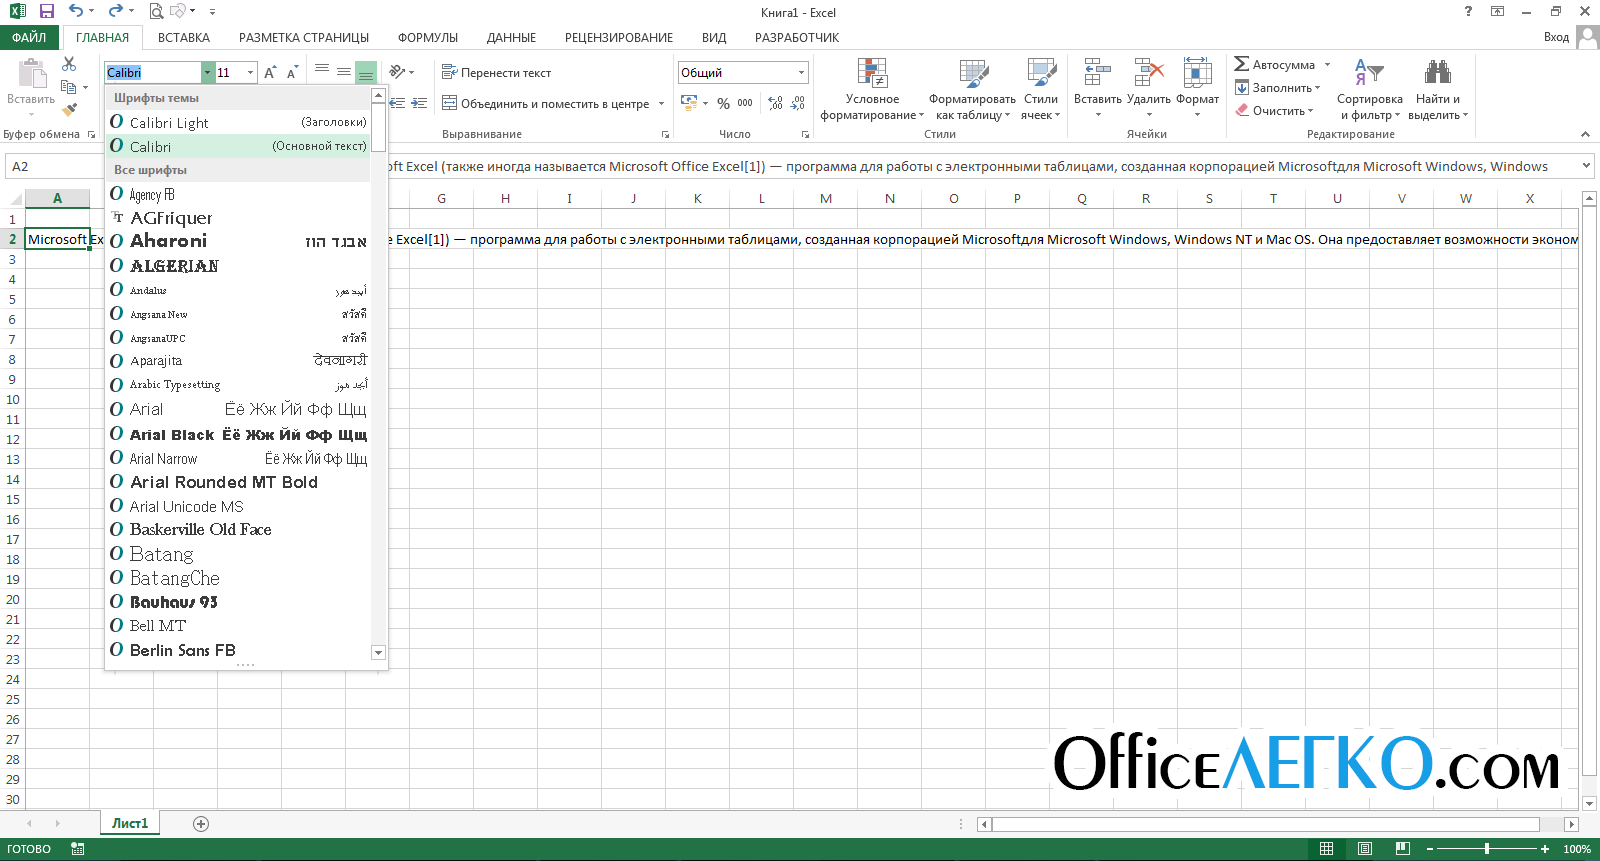 How to change cell format in Excel. Through the context menu, tools and hotkeys